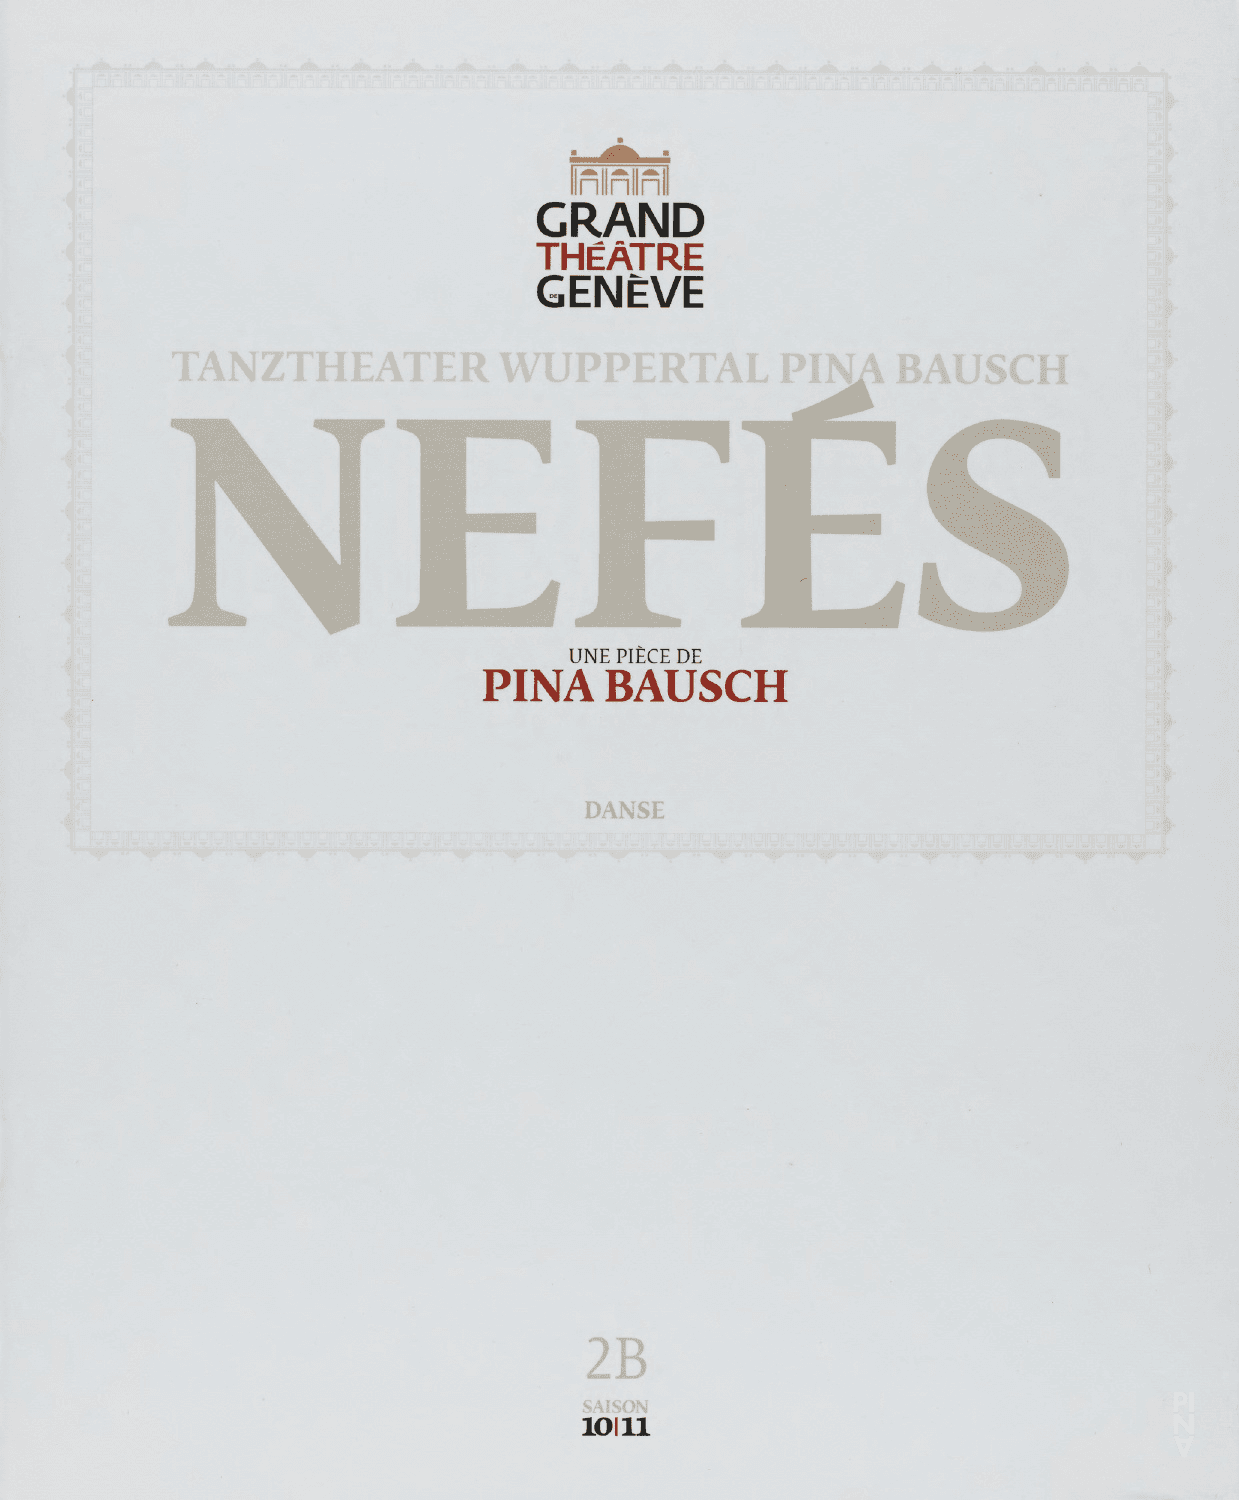 Booklet for “Nefés” by Pina Bausch with Tanztheater Wuppertal in in Geneva, 02/03/2011 – 02/06/2011